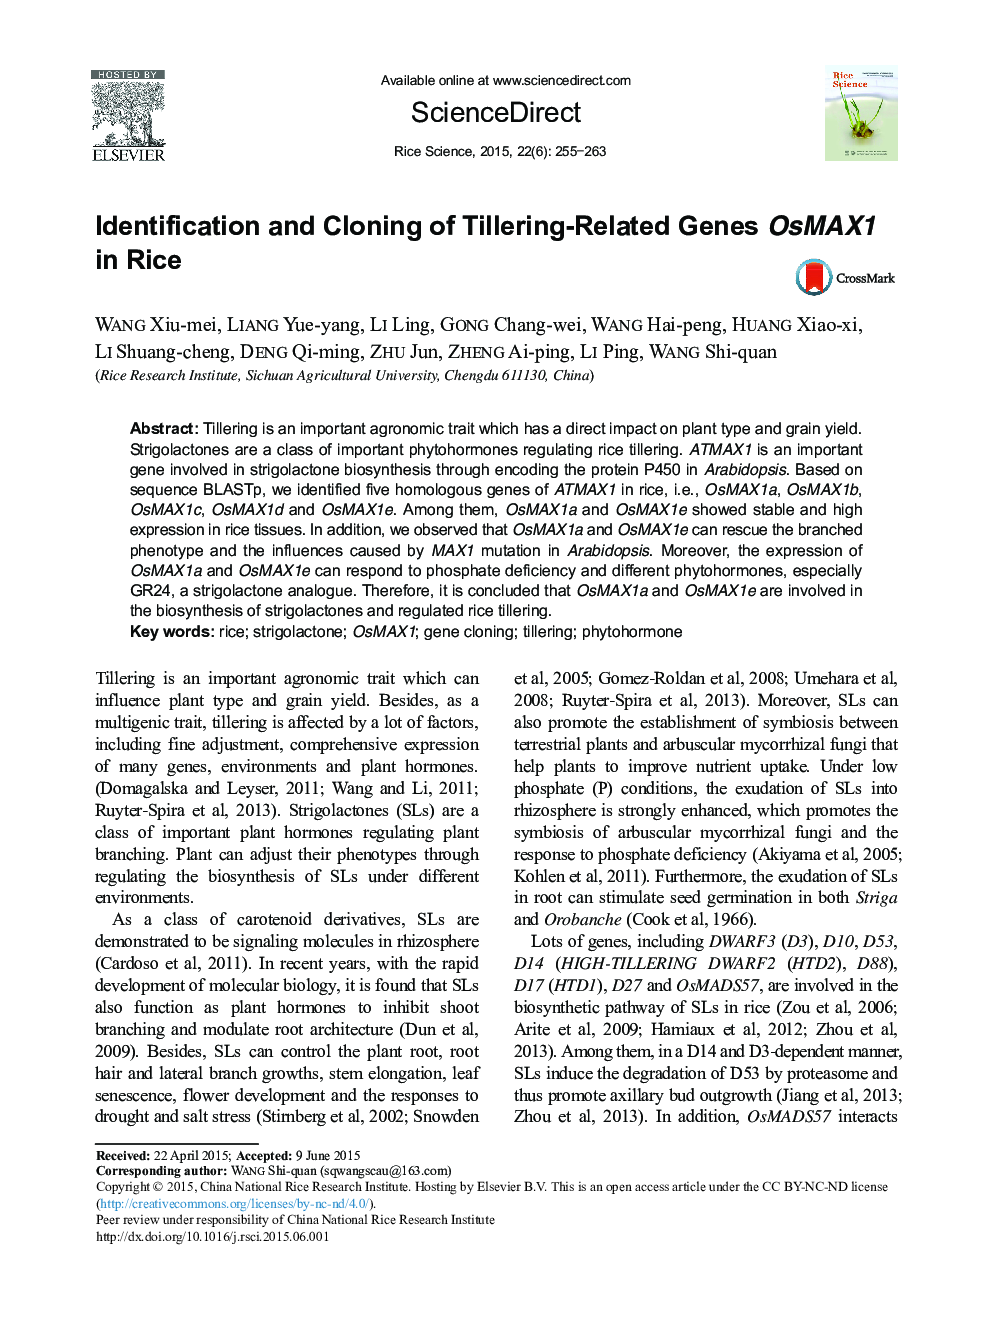 Identification and Cloning of Tillering-Related Genes OsMAX1 in Rice 